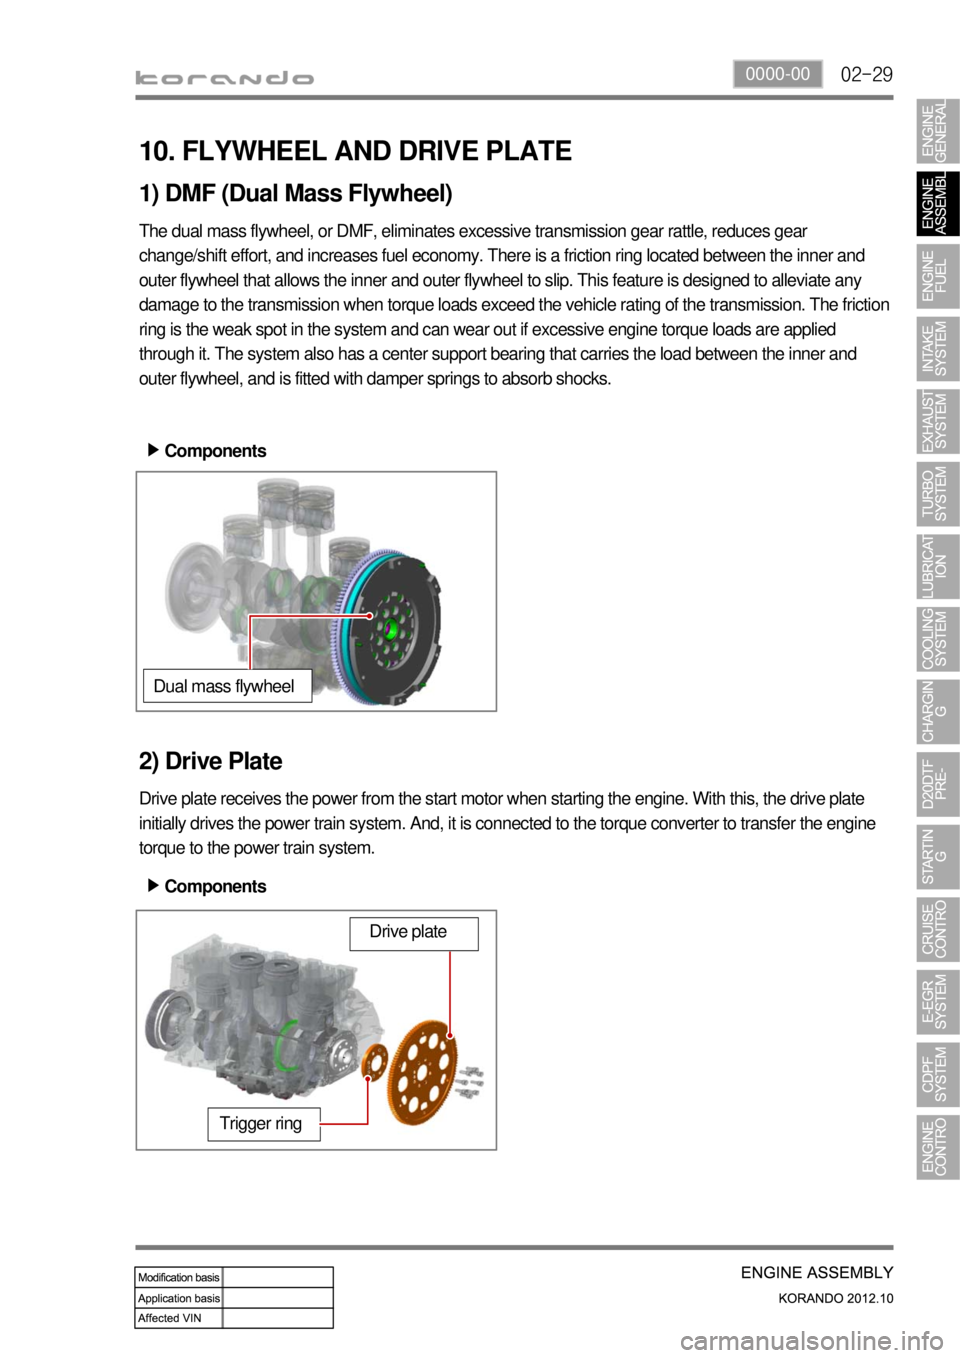 SSANGYONG KORANDO 2012  Service Manual 02-290000-00
10. FLYWHEEL AND DRIVE PLATE
1) DMF (Dual Mass Flywheel)
The dual mass flywheel, or DMF, eliminates excessive transmission gear rattle, reduces gear 
change/shift effort, and increases fu